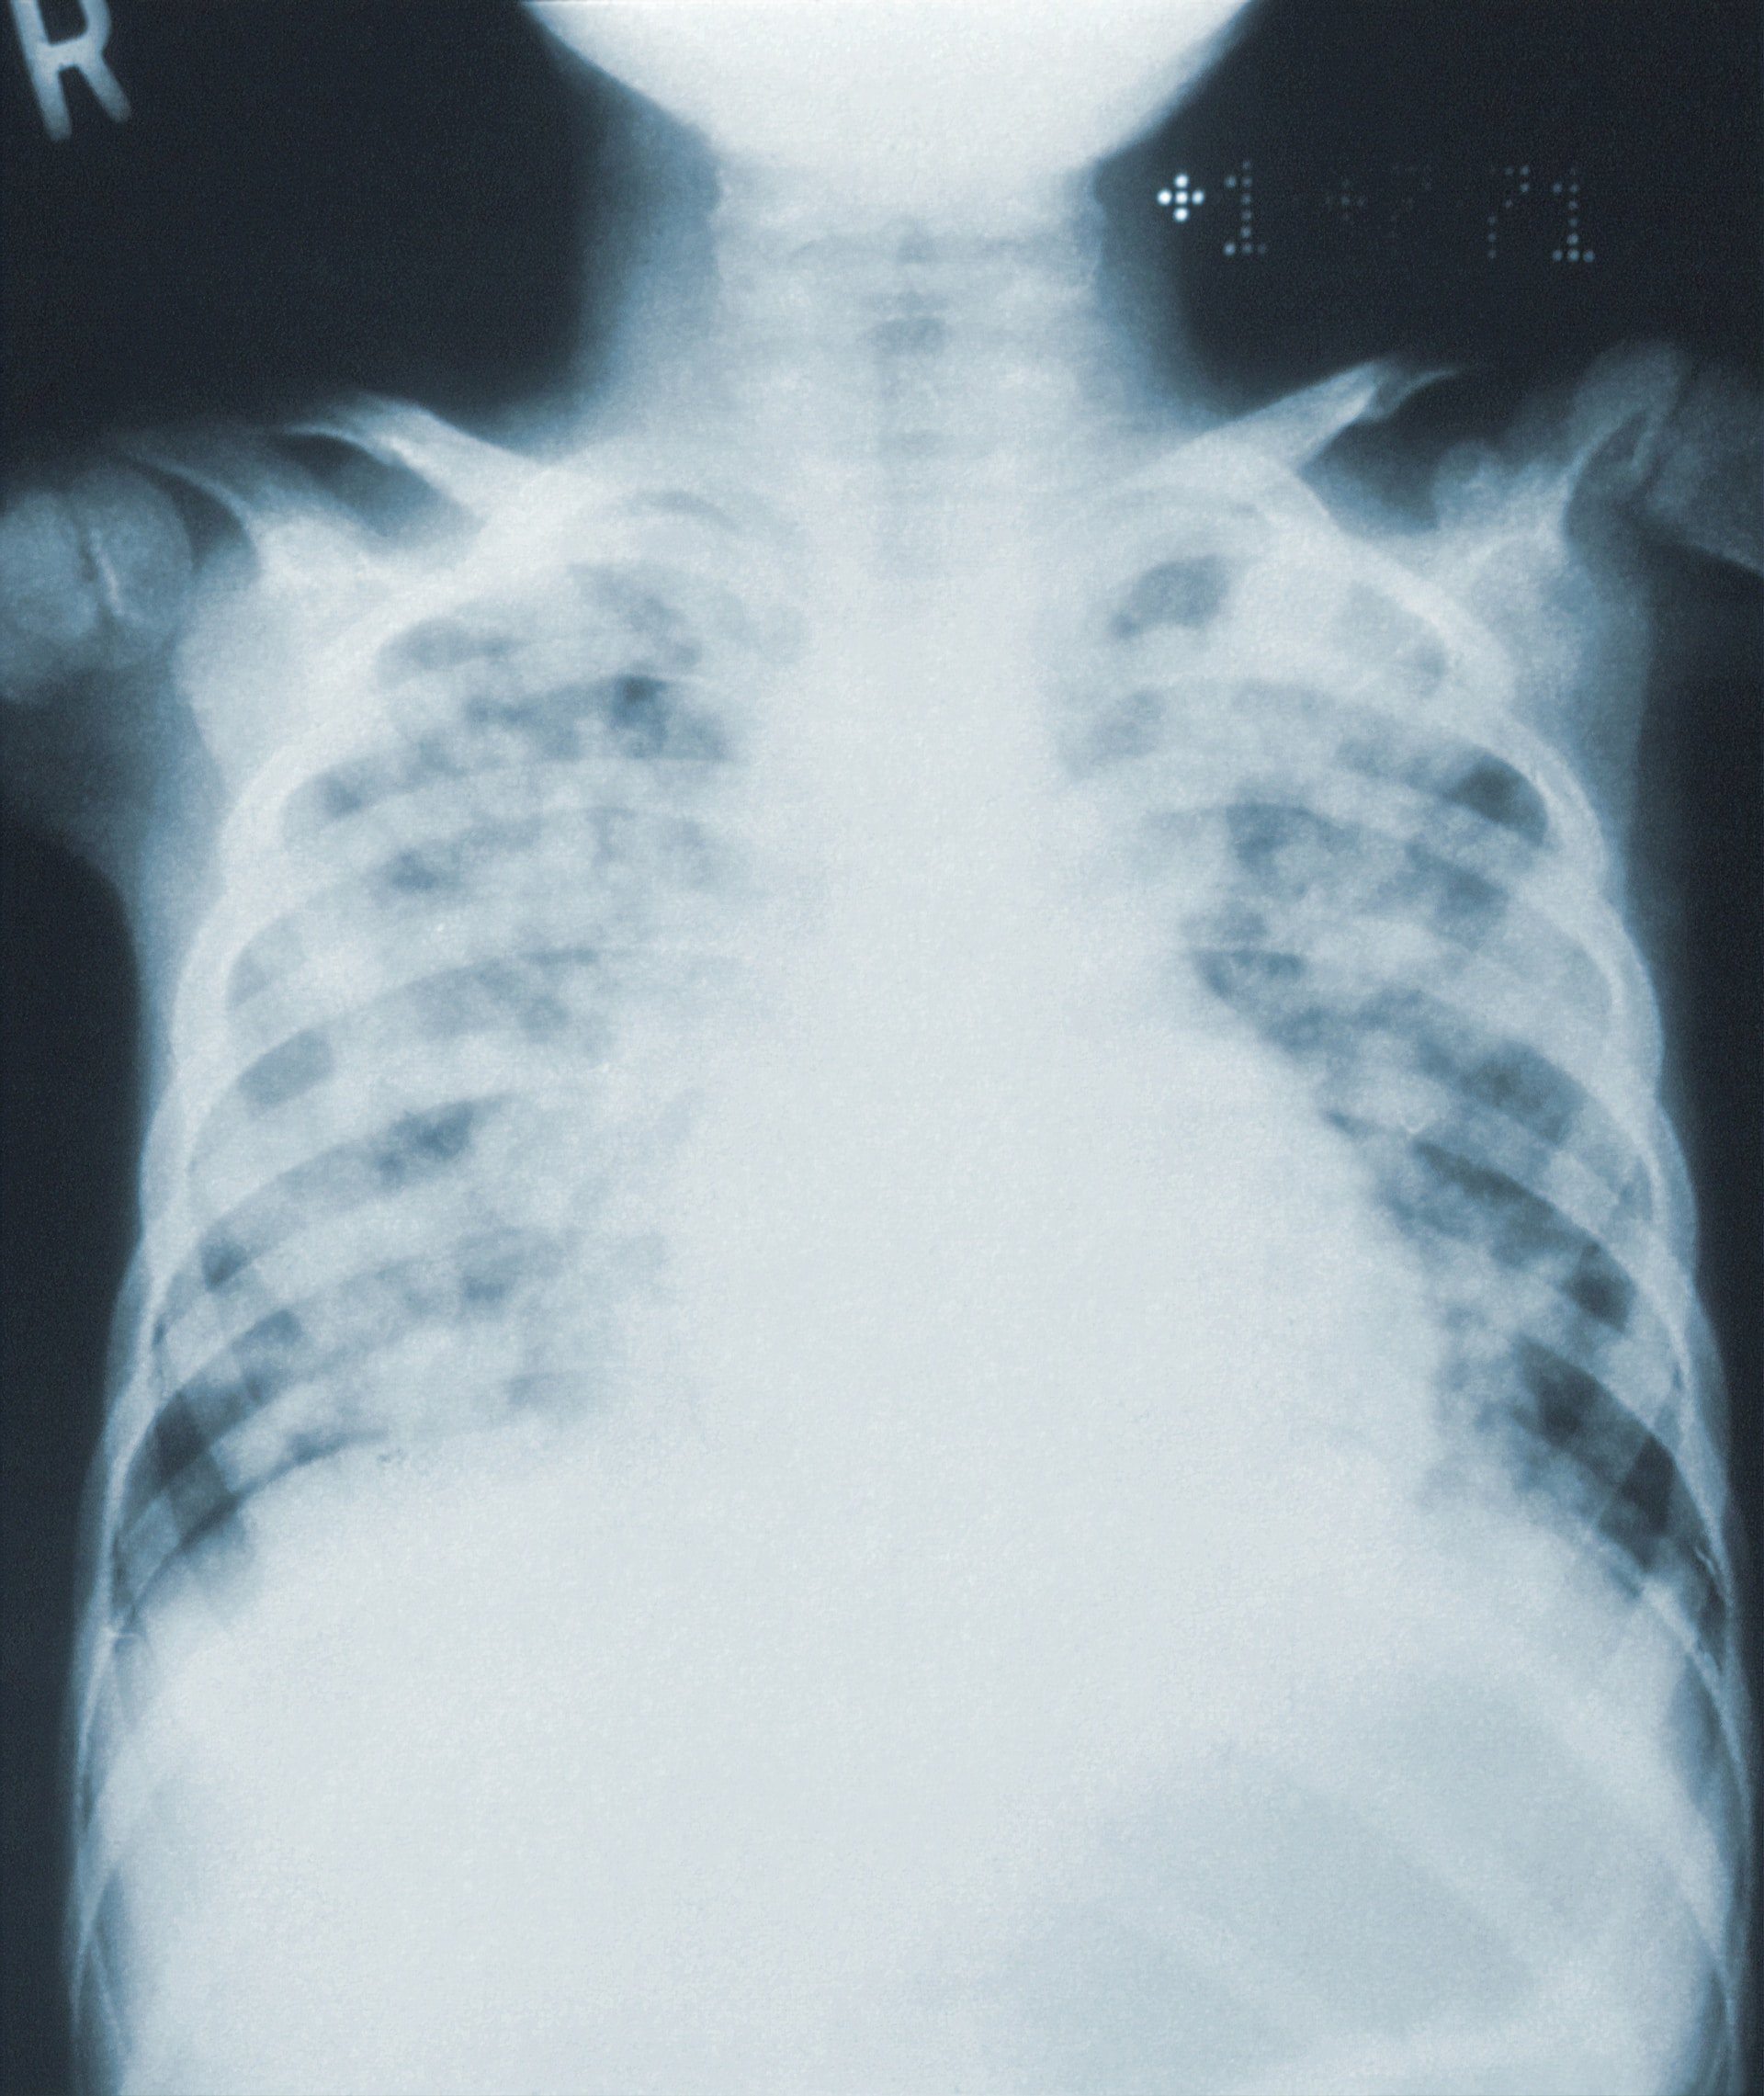 The Role of X-rays in Cancer Screening & Early Detection